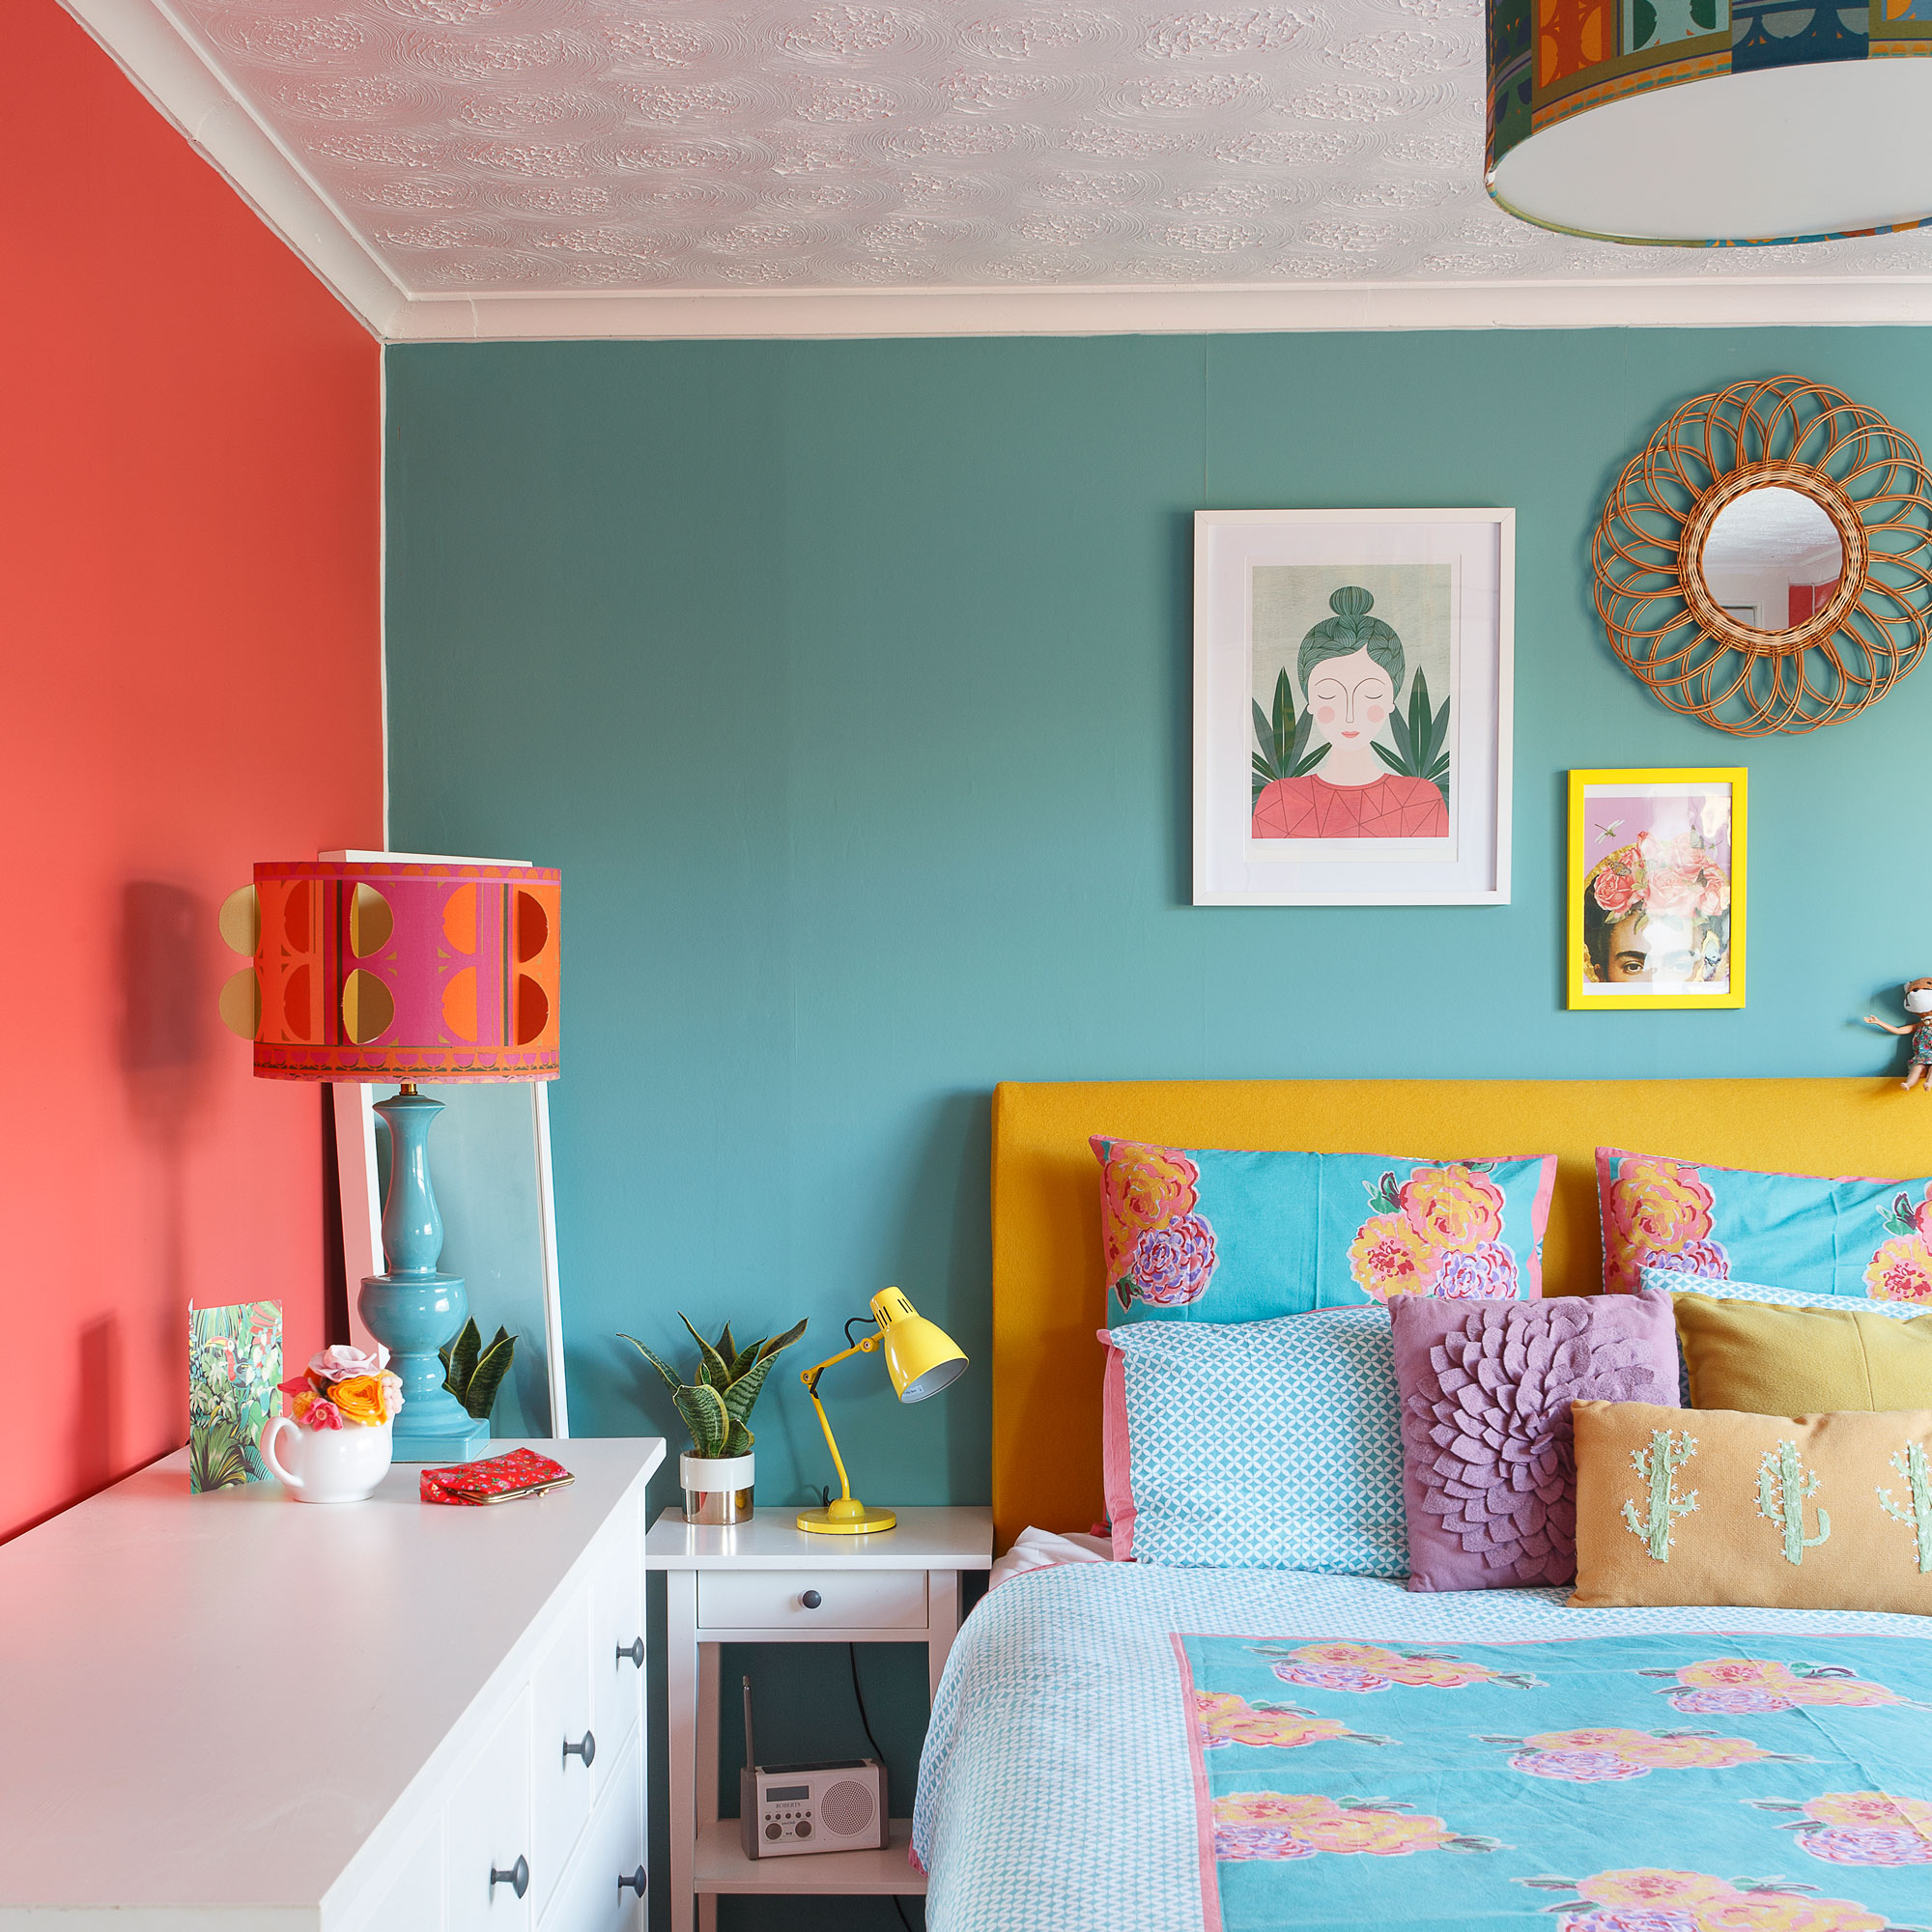 bedroom with blue and coral walls, yellow headboard and patterned cushions